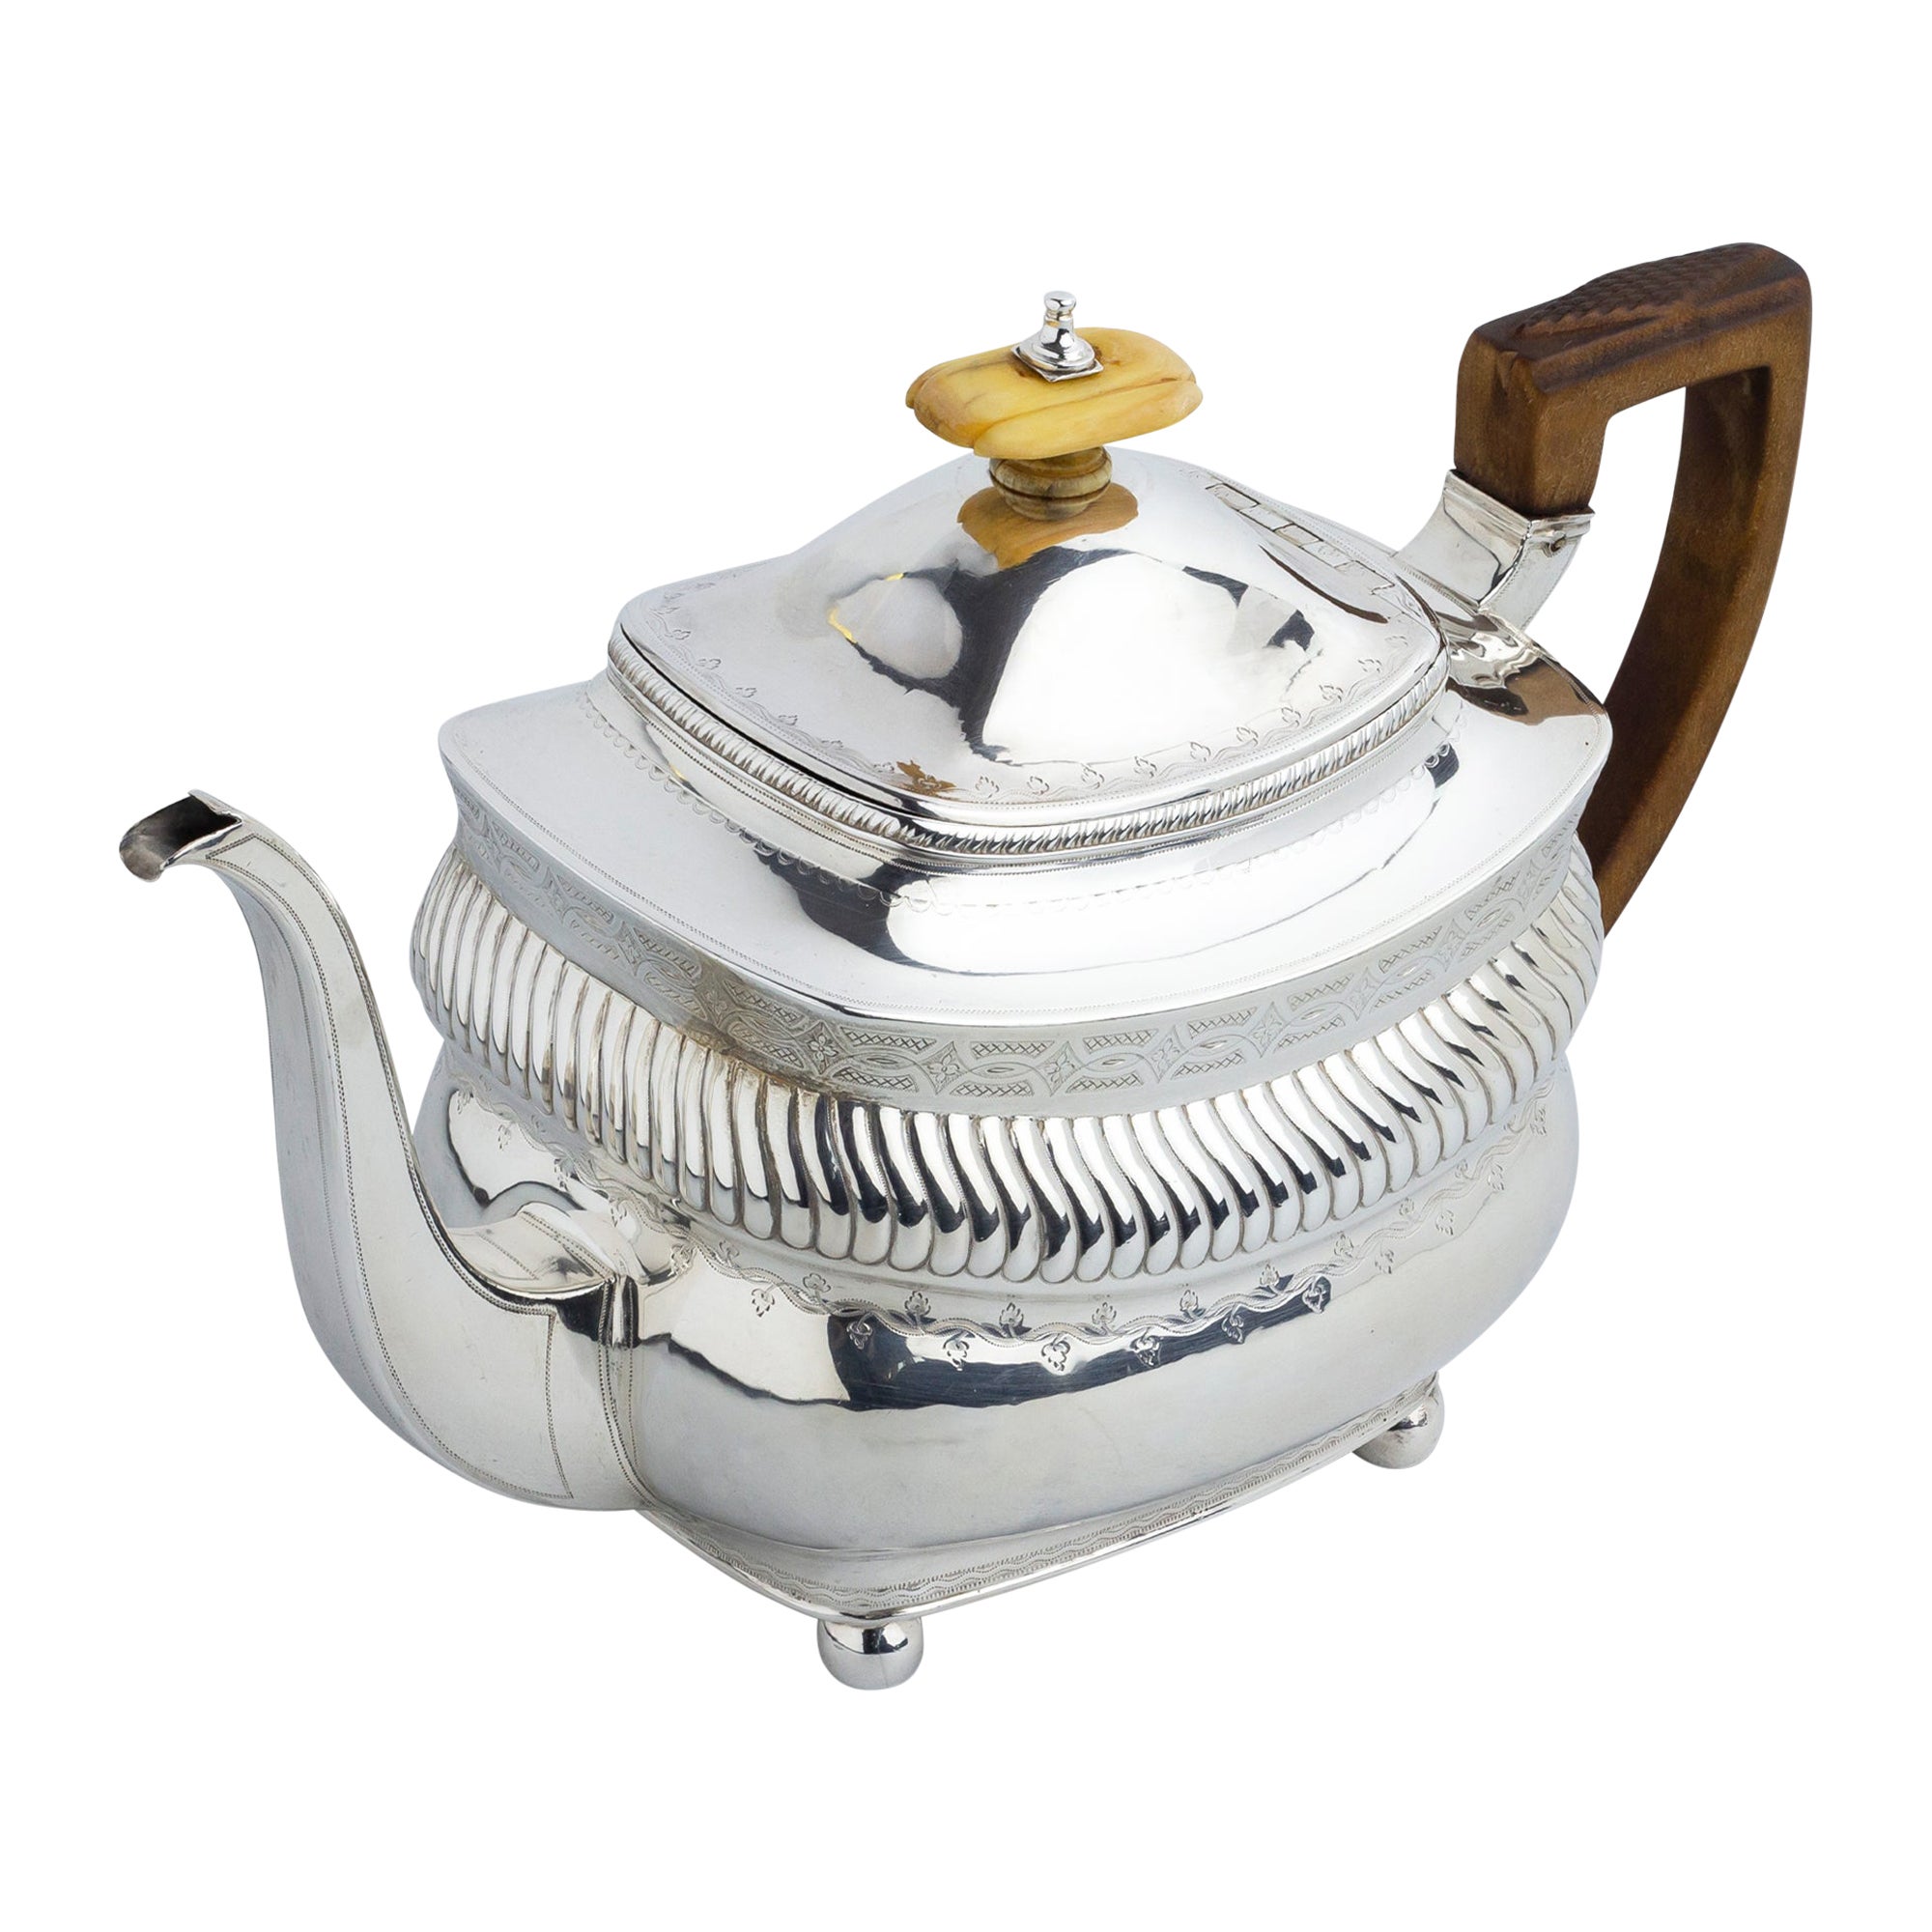 George III Sterling Silver Teapot by Peter and William Bateman with Bone Finial